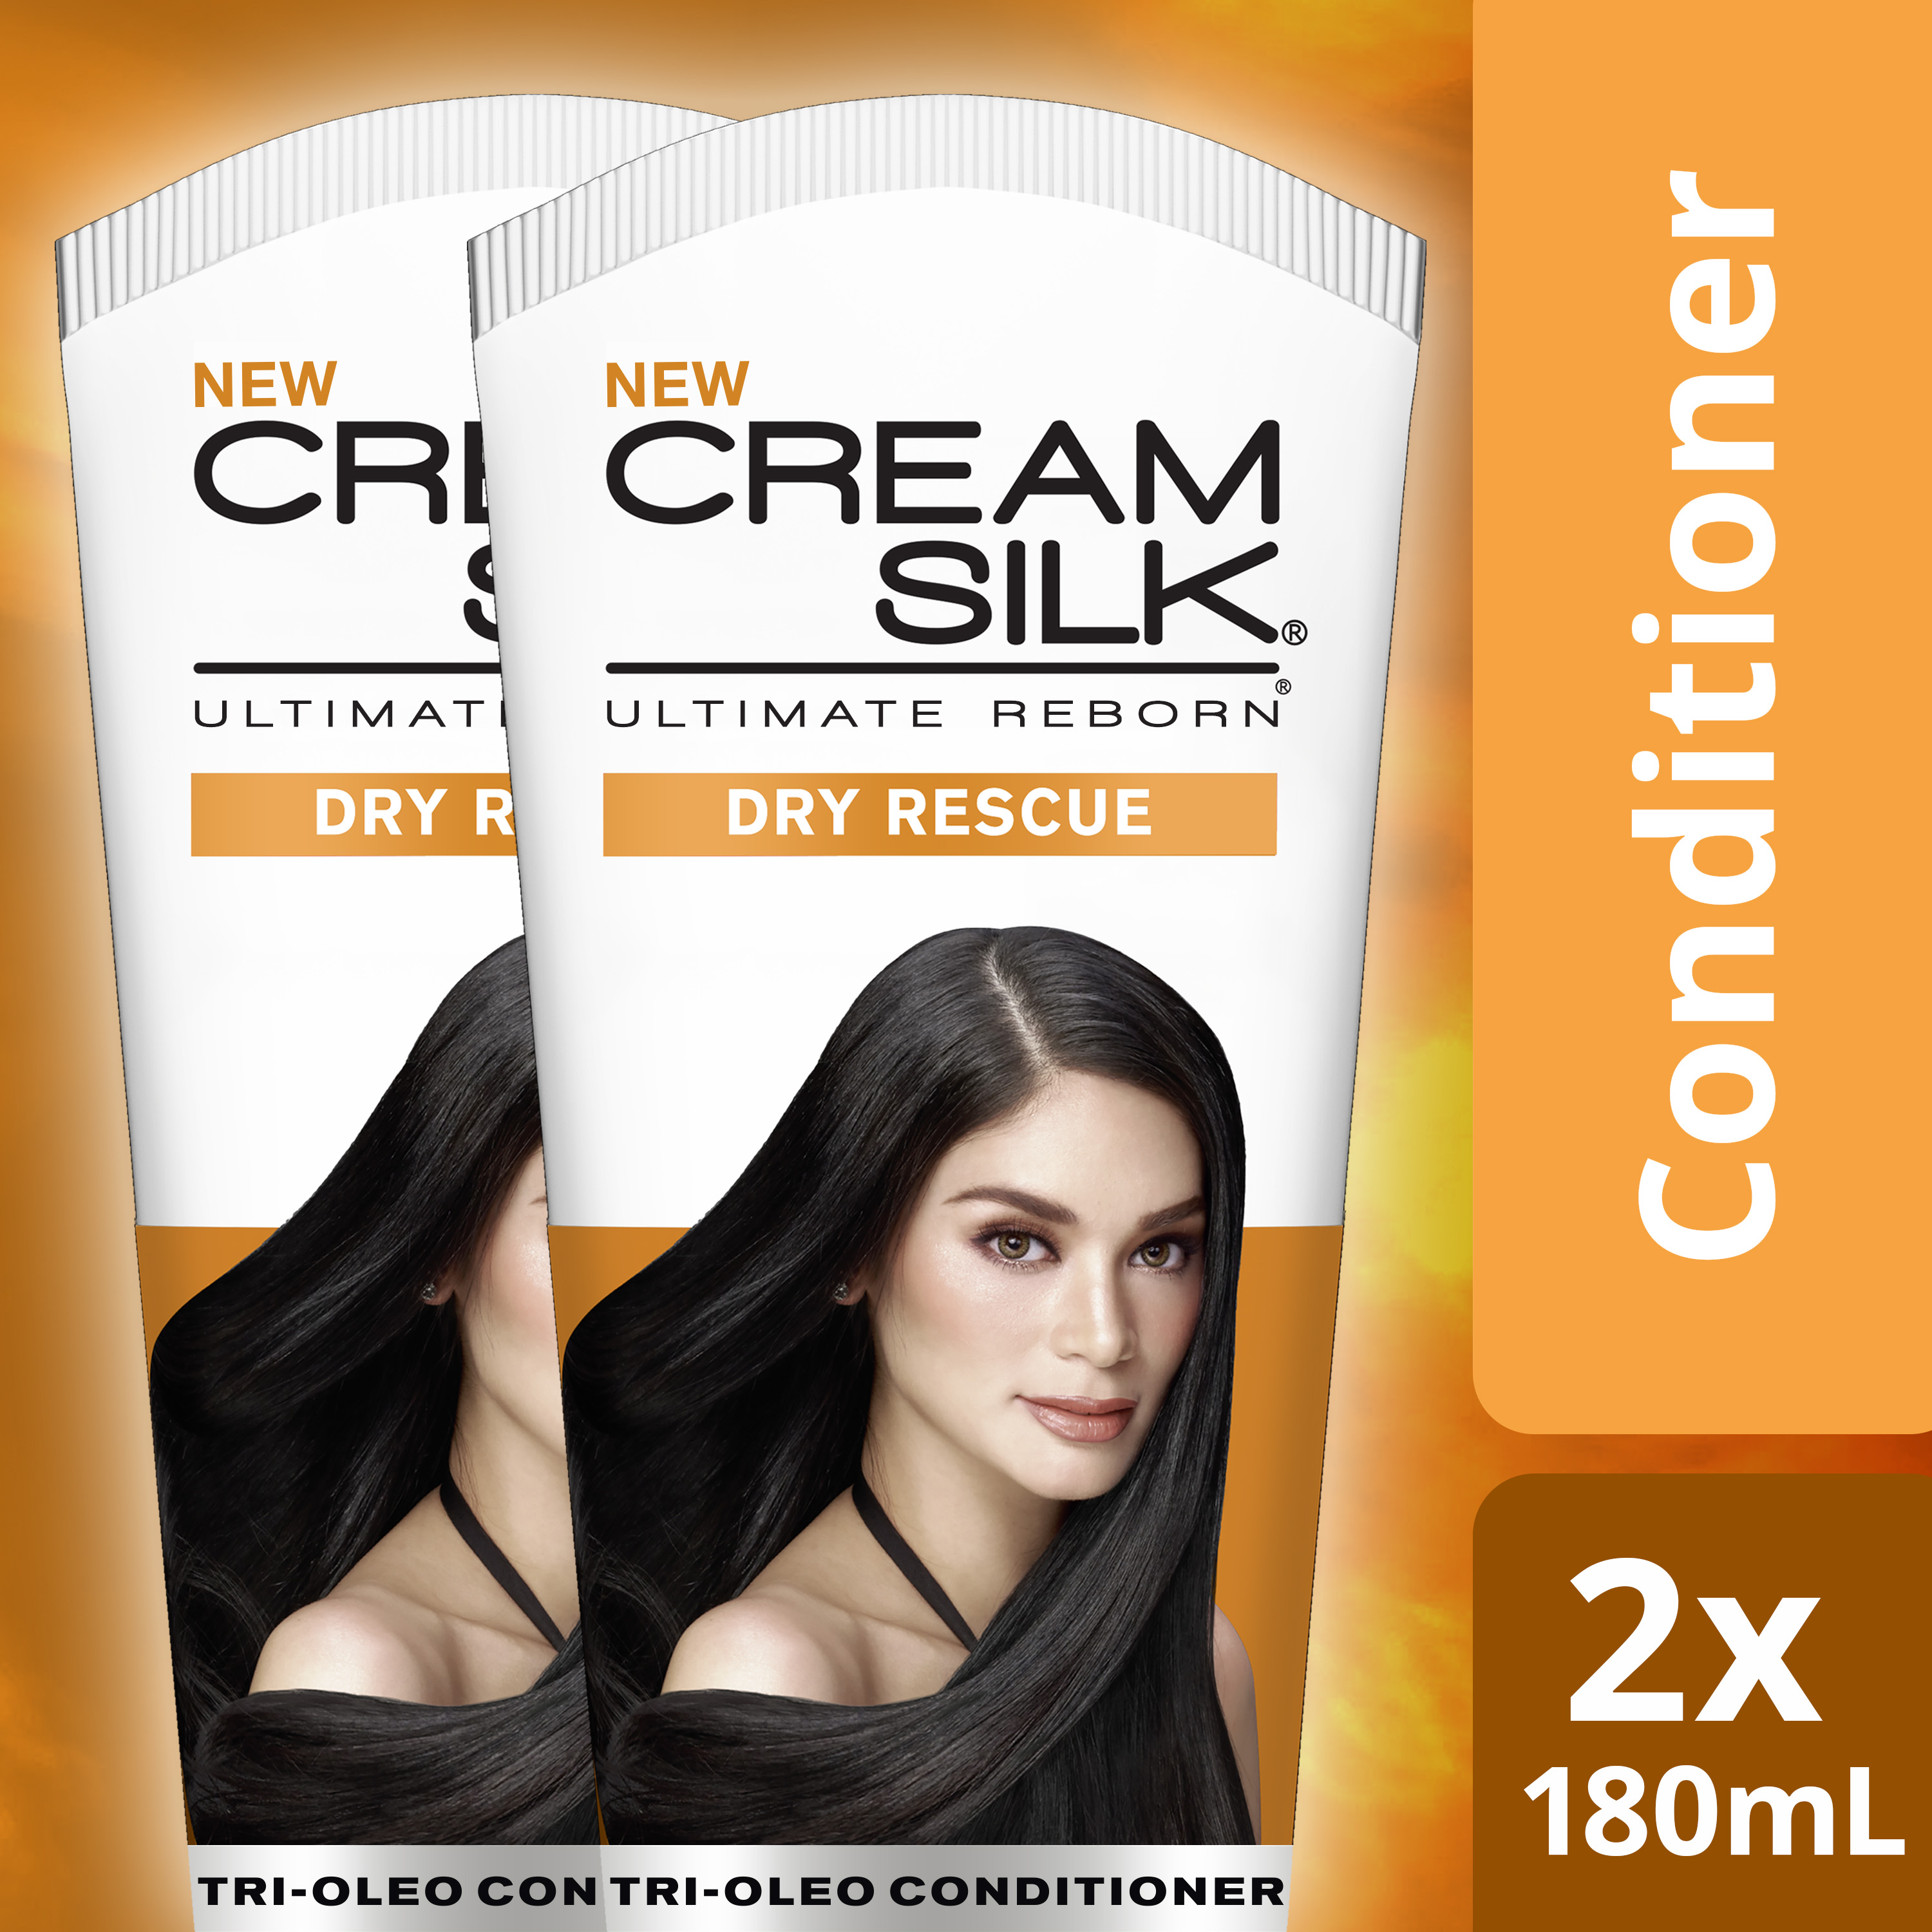 Cream Silk Ultimate Reborn Tri-Oleo Hair Conditioner Dry Rescue for Weak  and Damaged Hair and Damage Care with Moisture Lock Complex 180ml 2x Promo  Bundle | Lazada PH